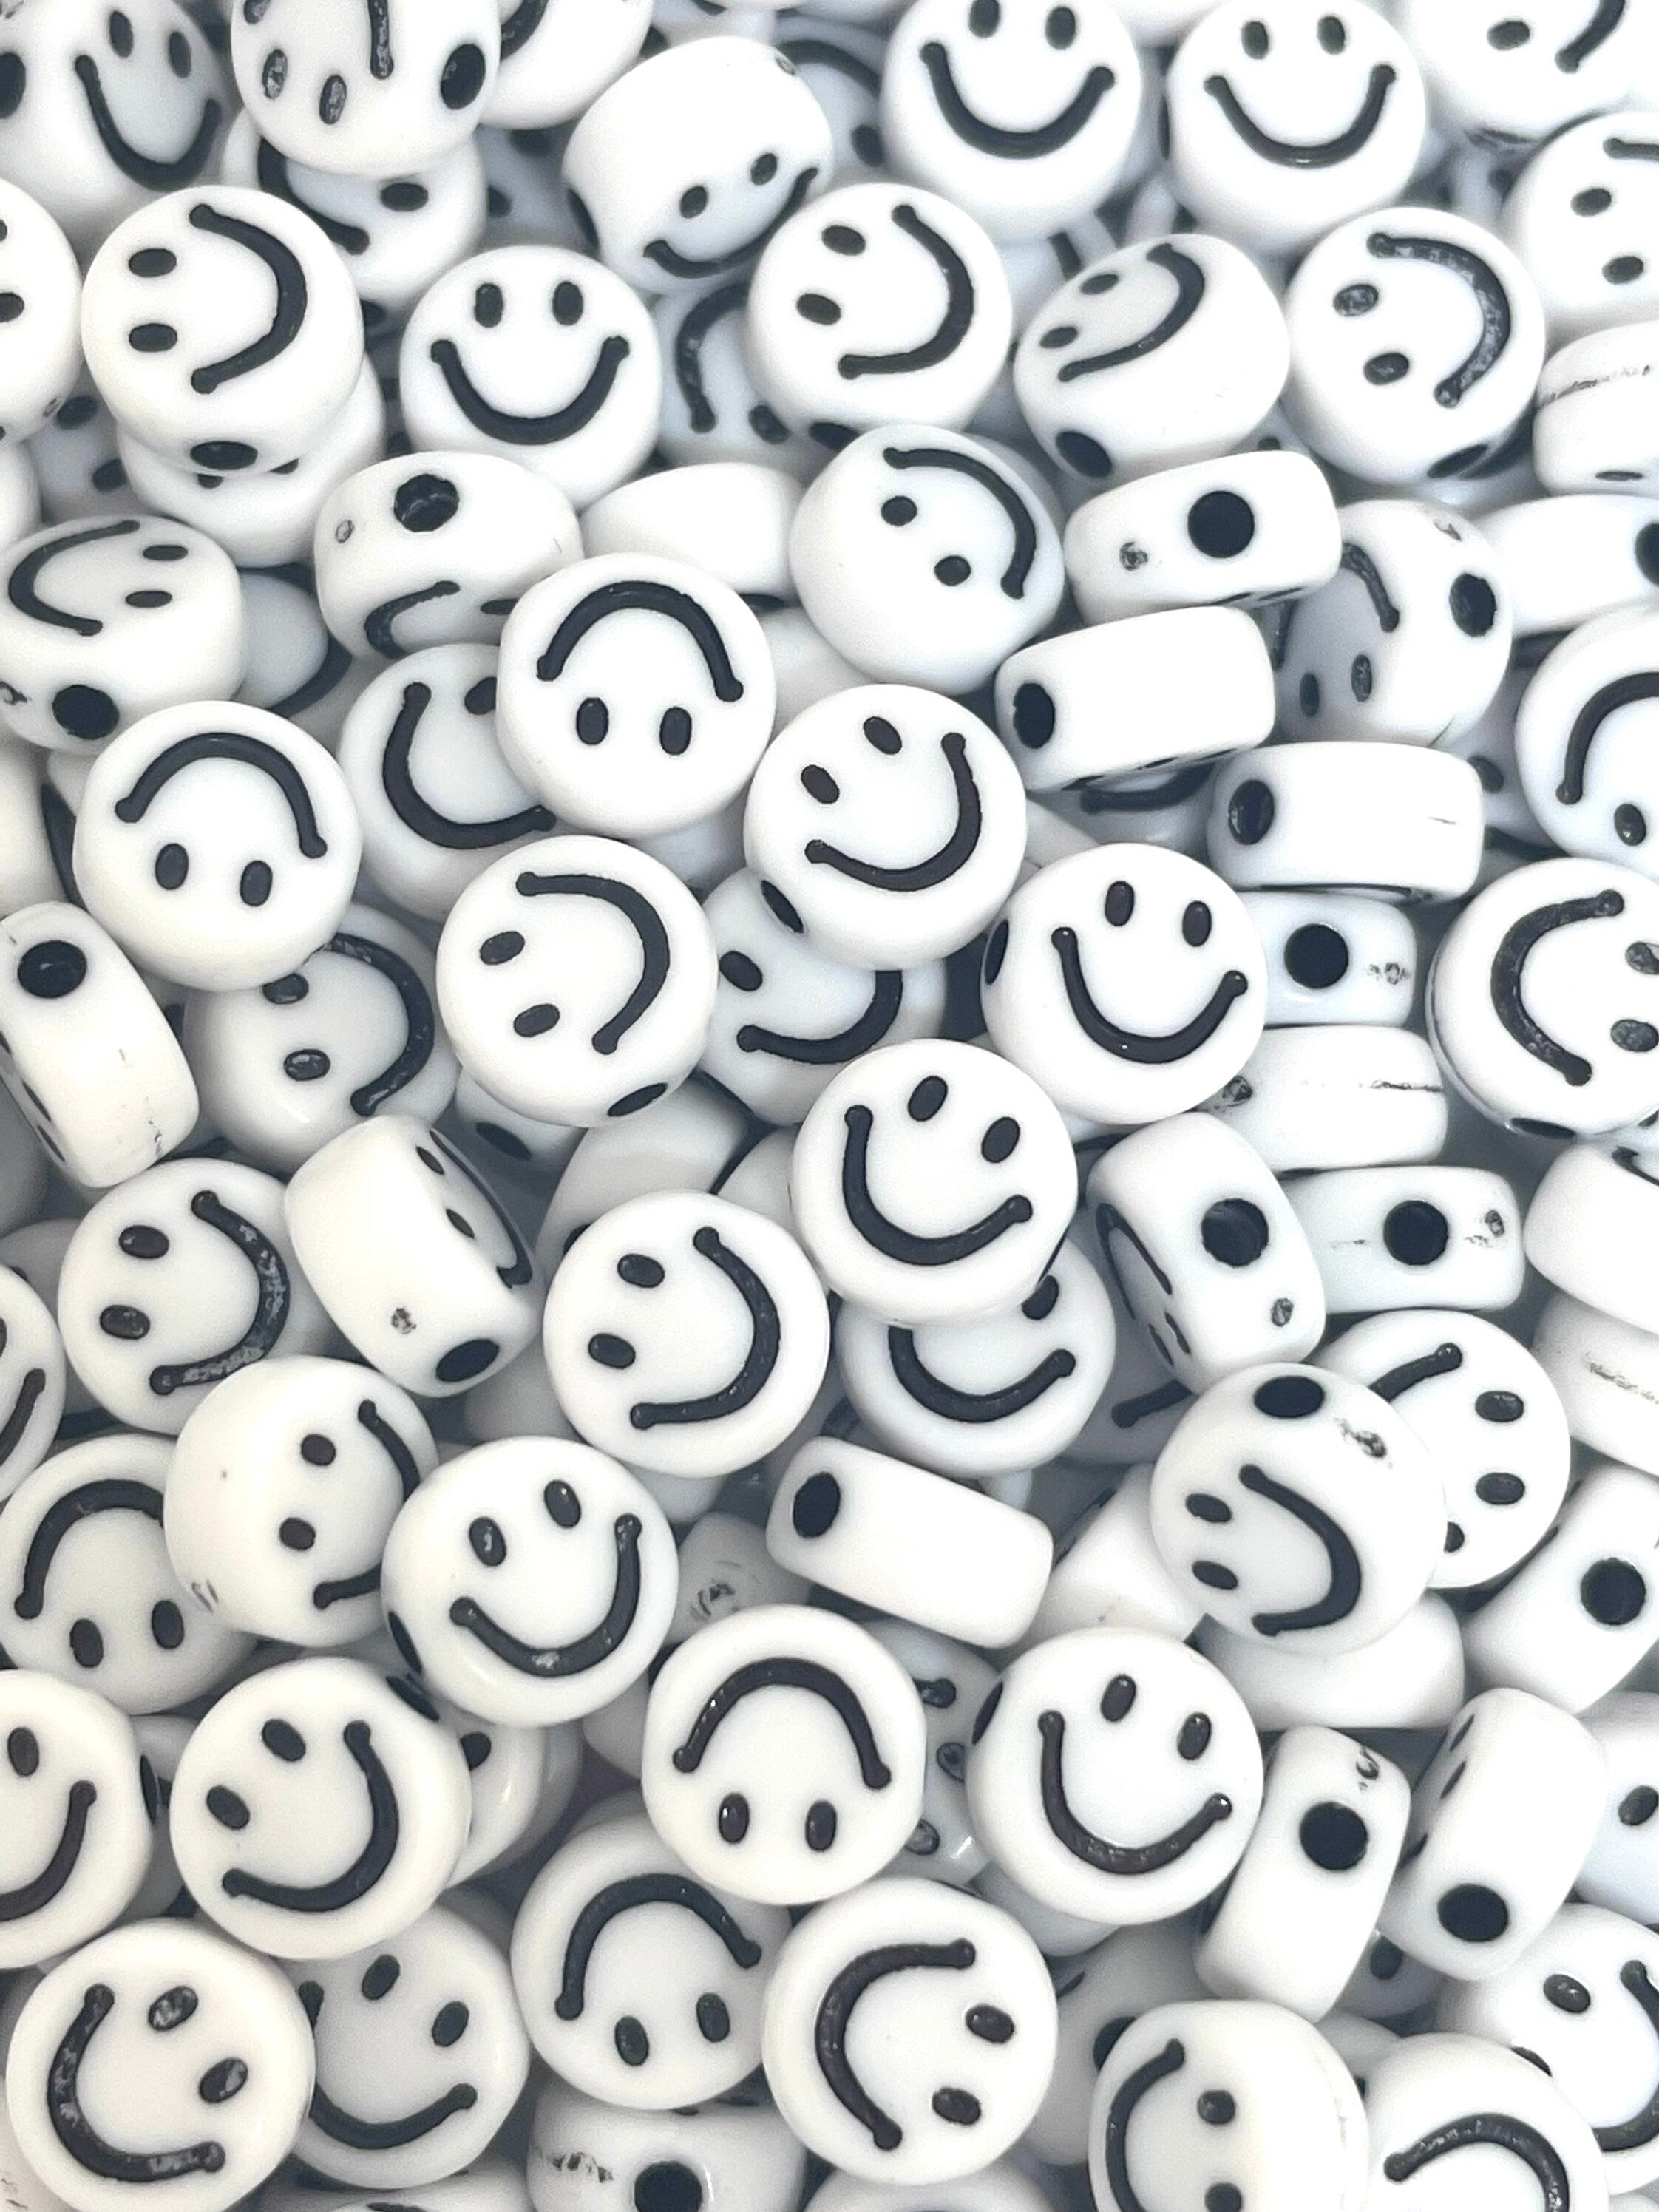 Cute Yellow Happy Face Beads, Emoji Charms, Smiley Face Pendants